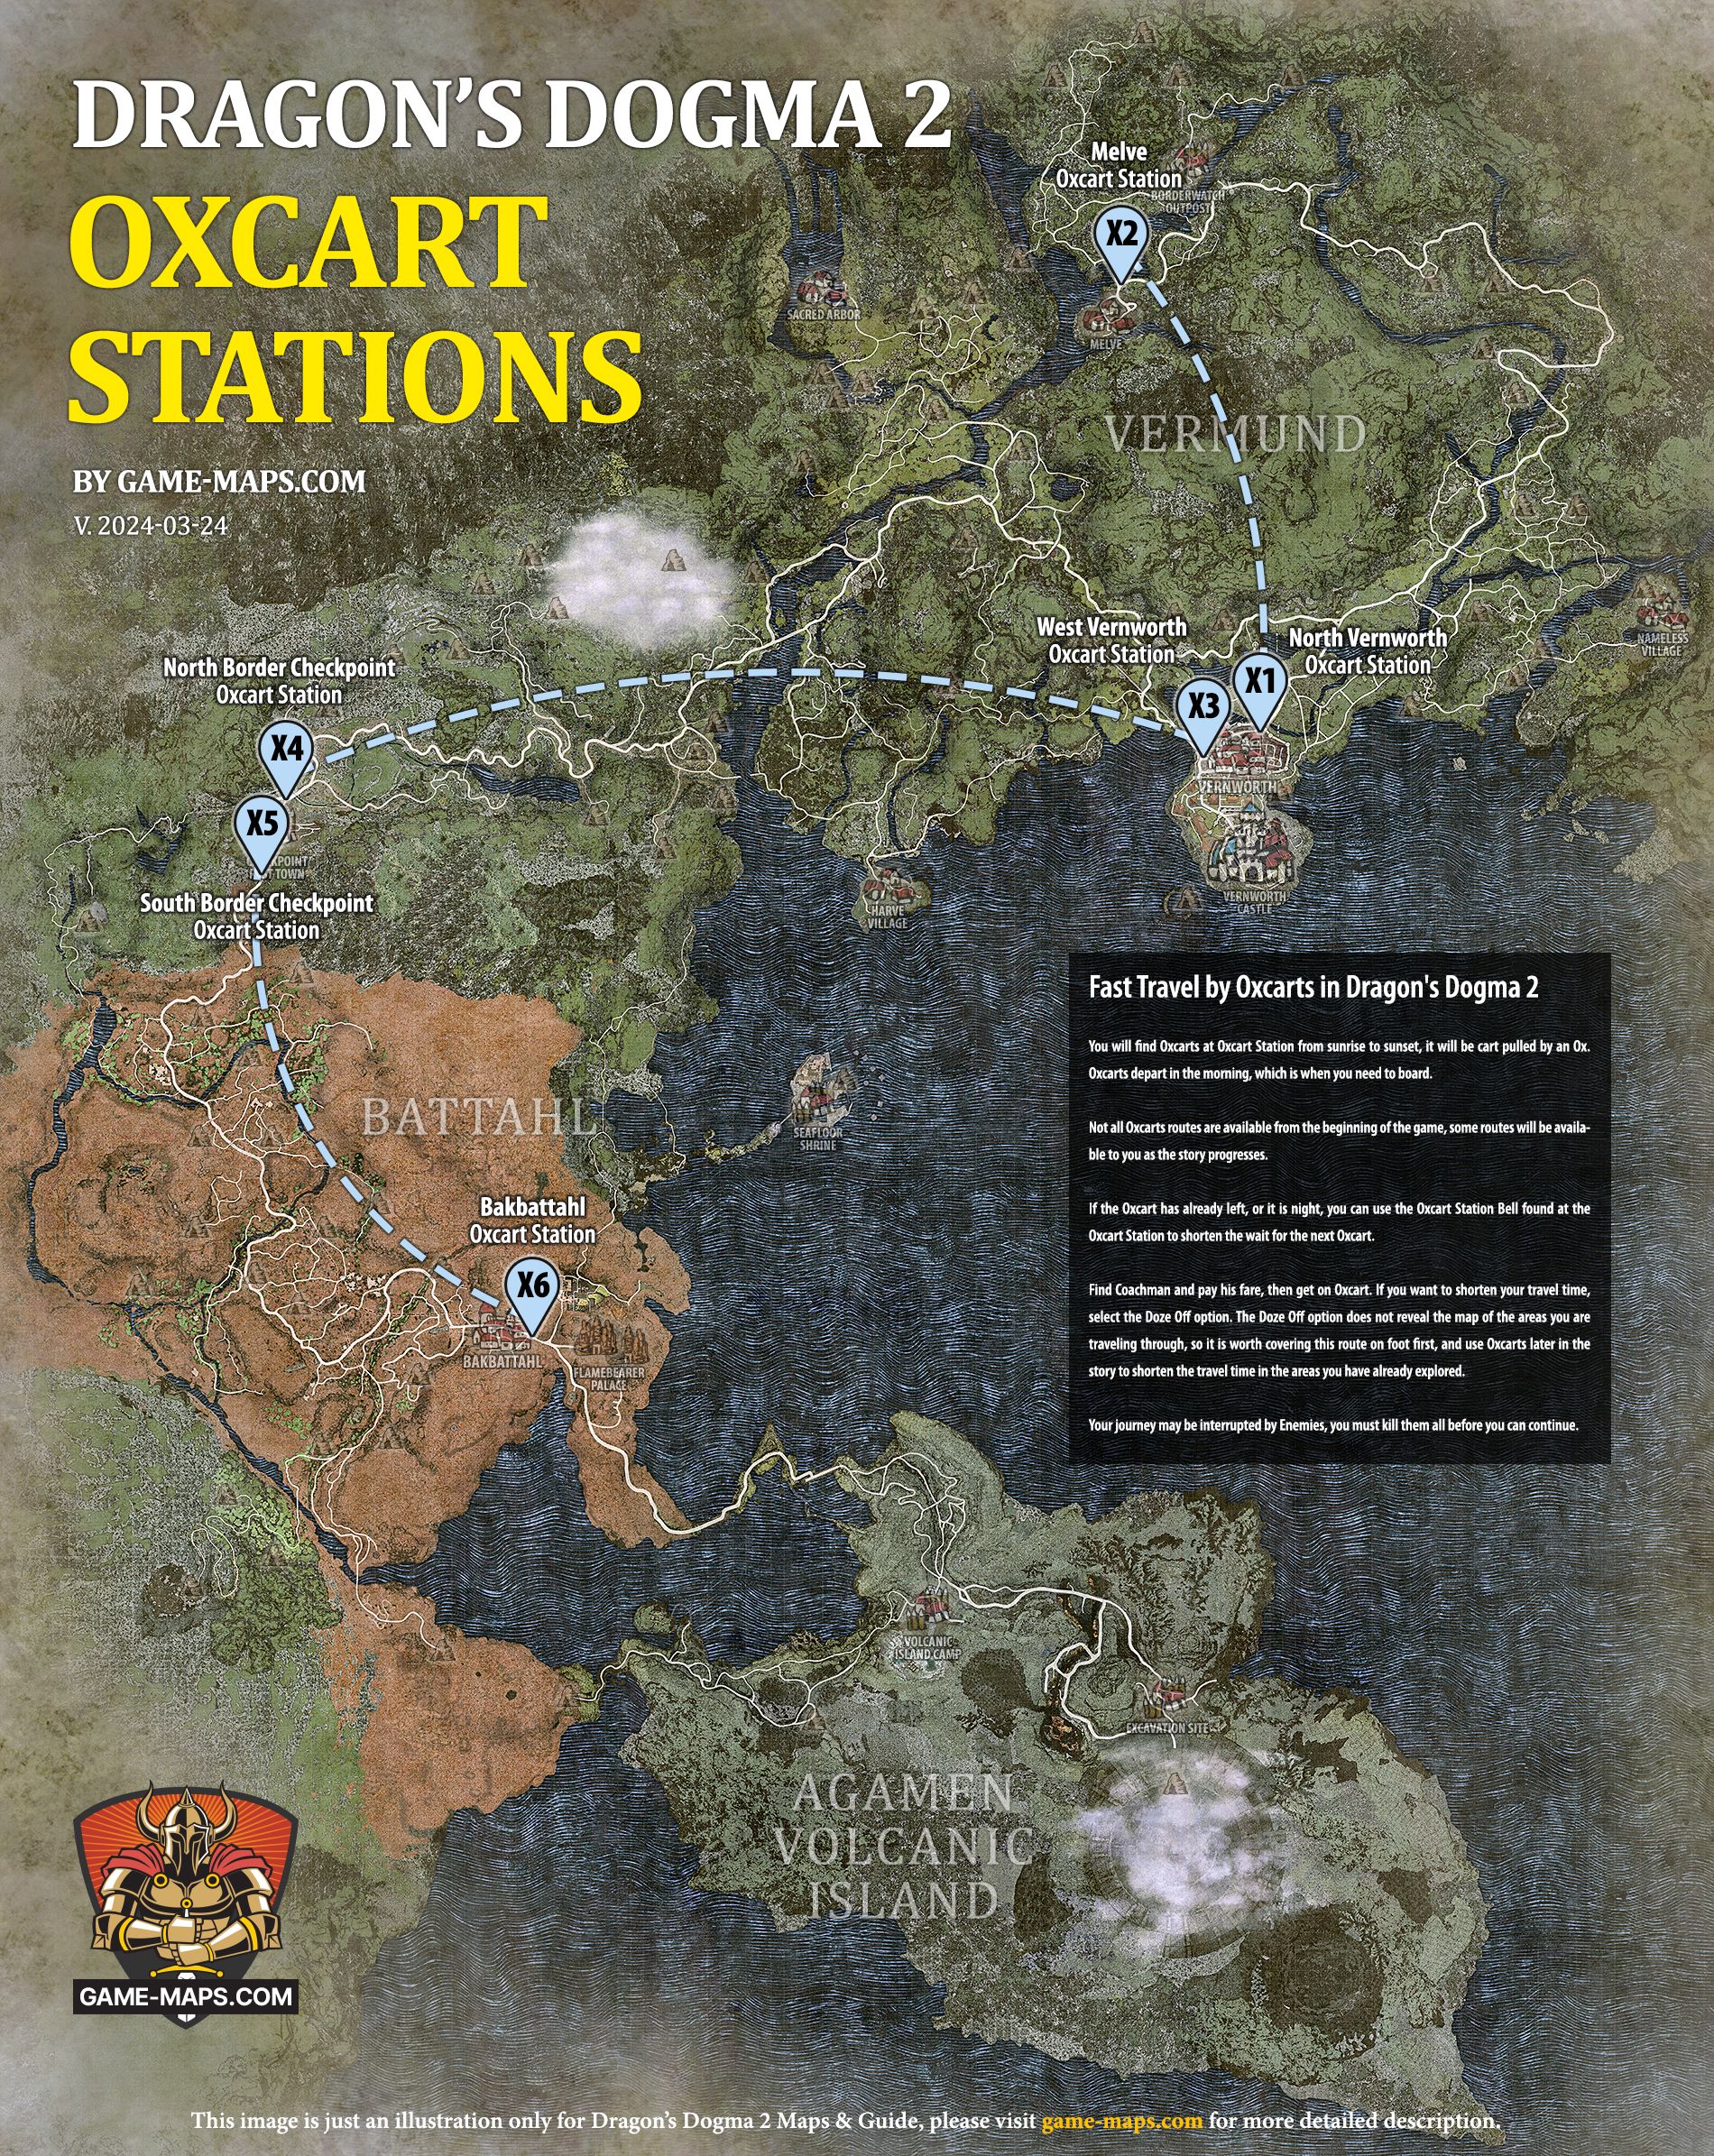 Map of Oxcart Station Locations in Dragon's Dogma 2